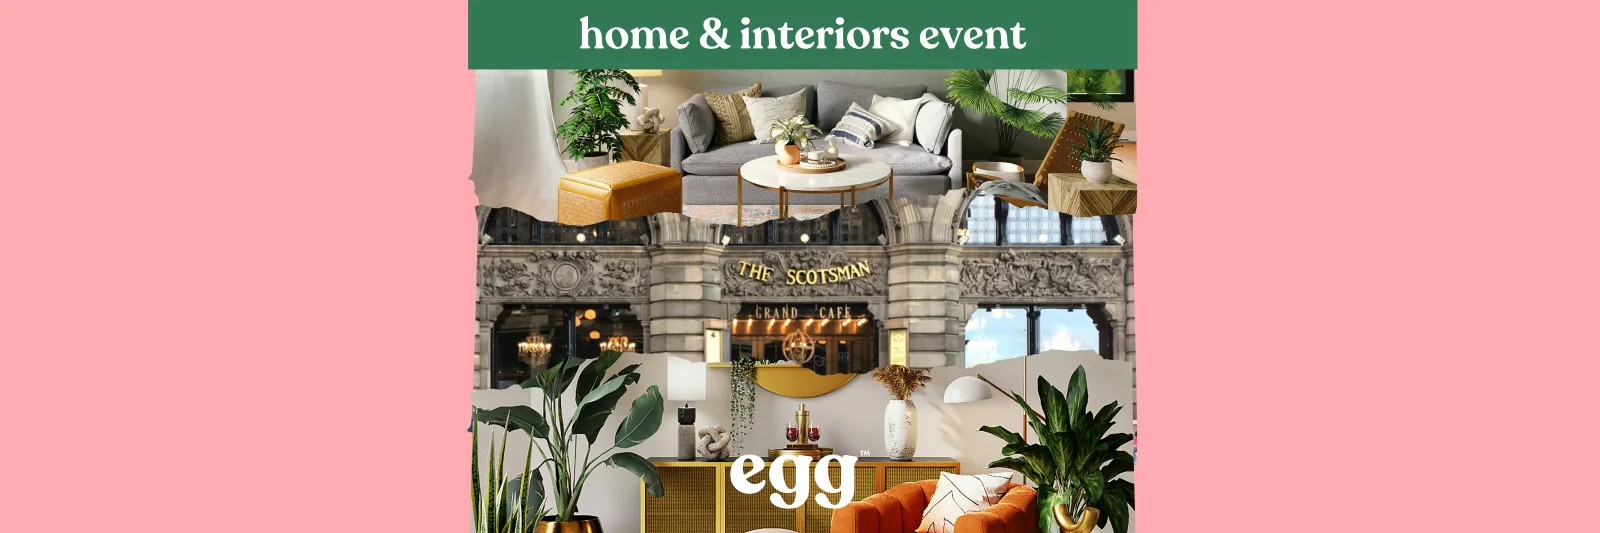 Our home & interiors event with Anna Campbell-Jones